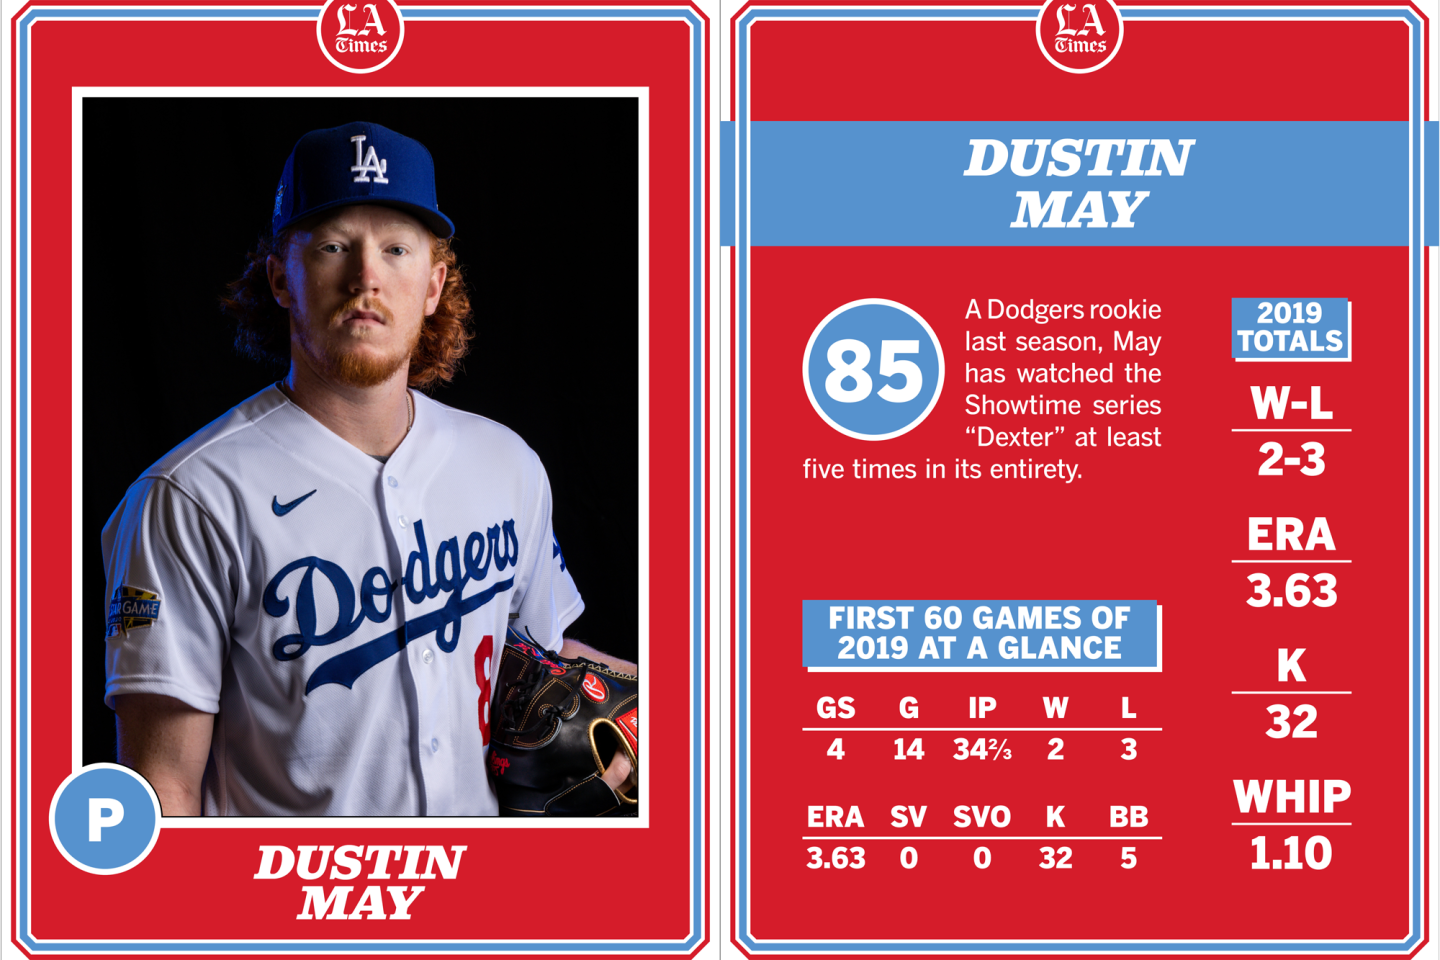 Dustin May, Dodgers 2020